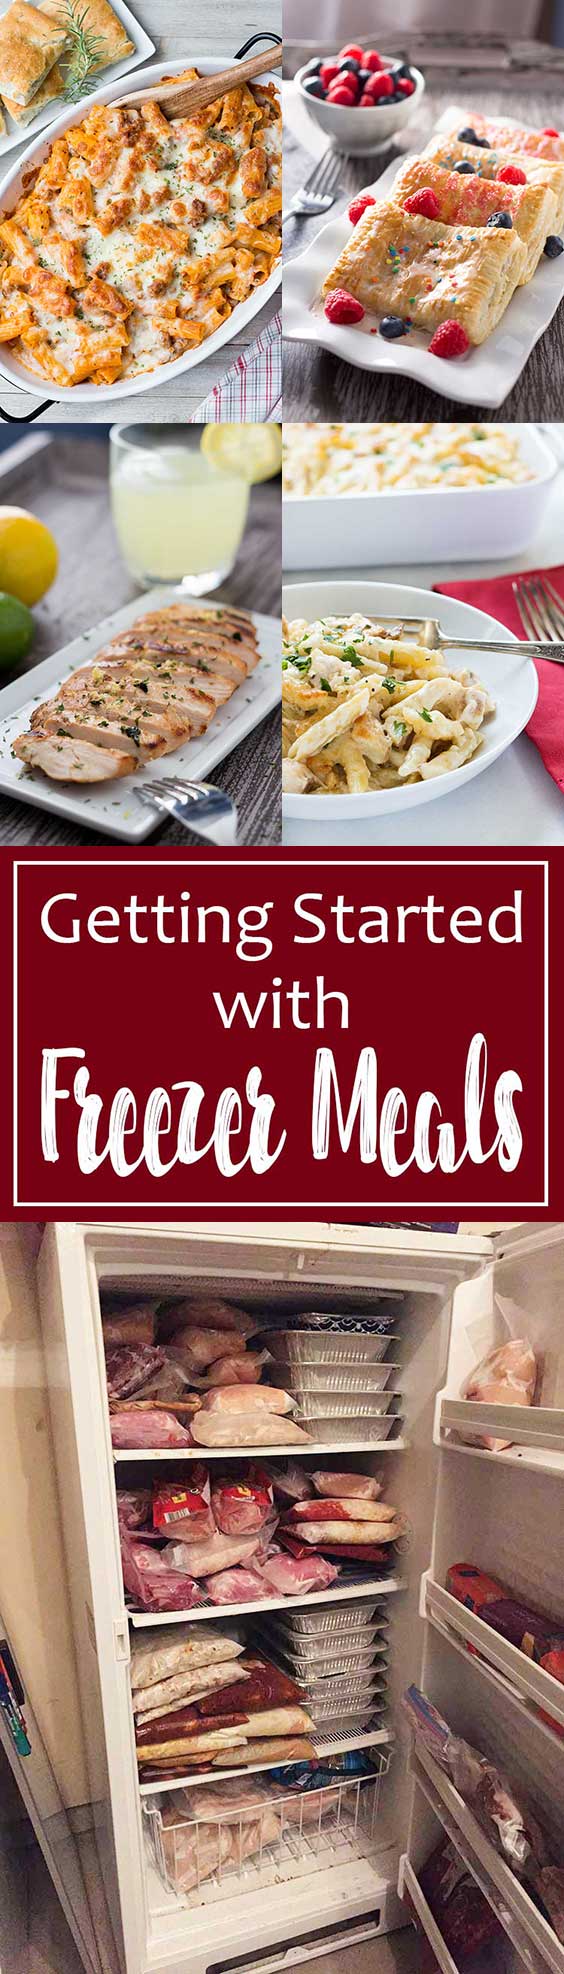 Getting Started with Freezer Meals | Freezer meals can help you save time and money (and your sanity) in the kitchen! Let me share with you what I've learned over the last 14 years of doing freezer meals, so you can get started doing freezer meals too!